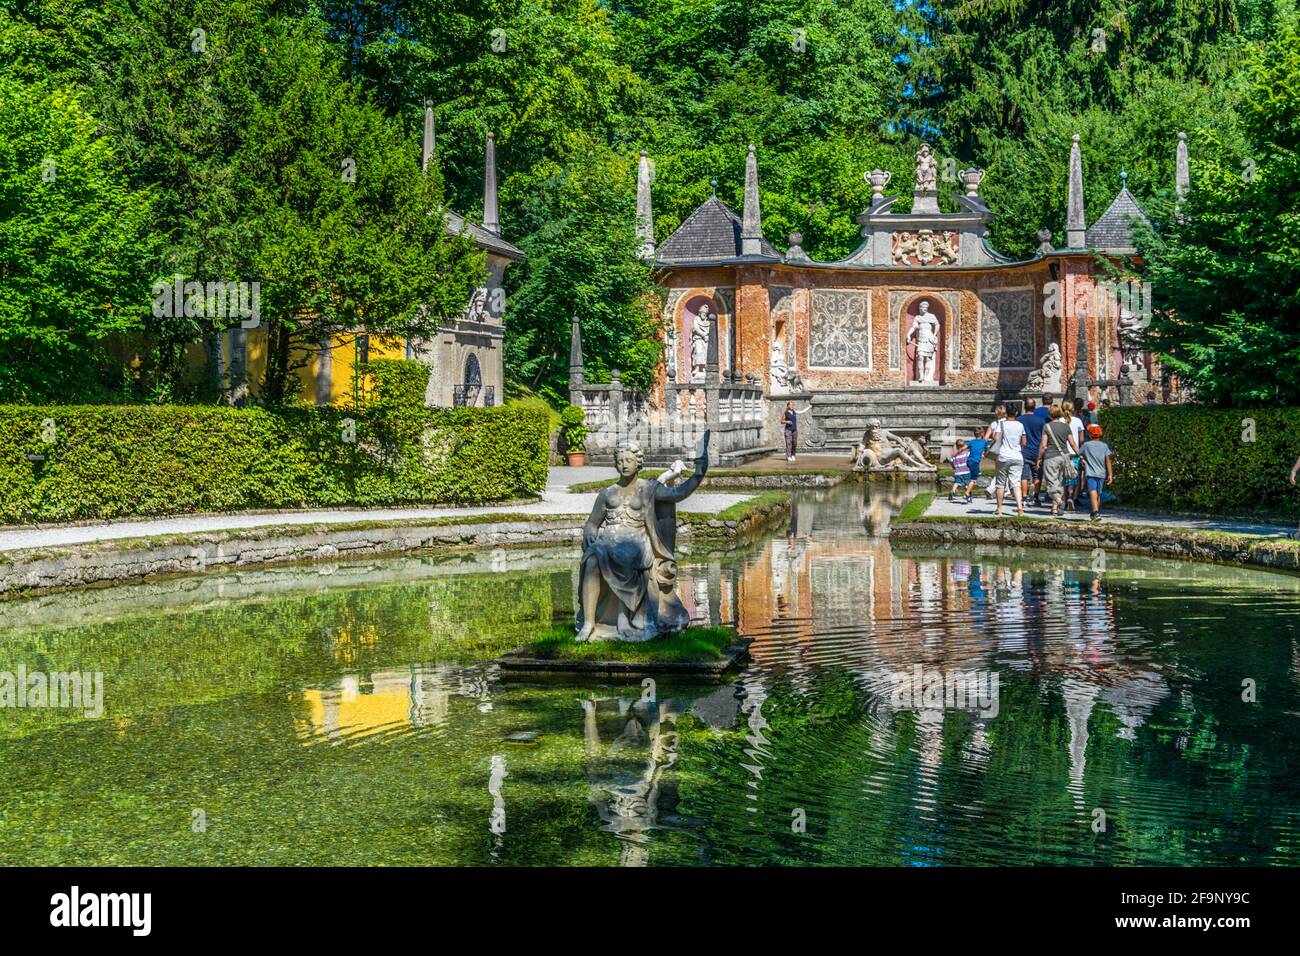 View of a trick fountain situated in a public park near the Hellbrunn Palace, Salzburg, Austria. Stock Photo